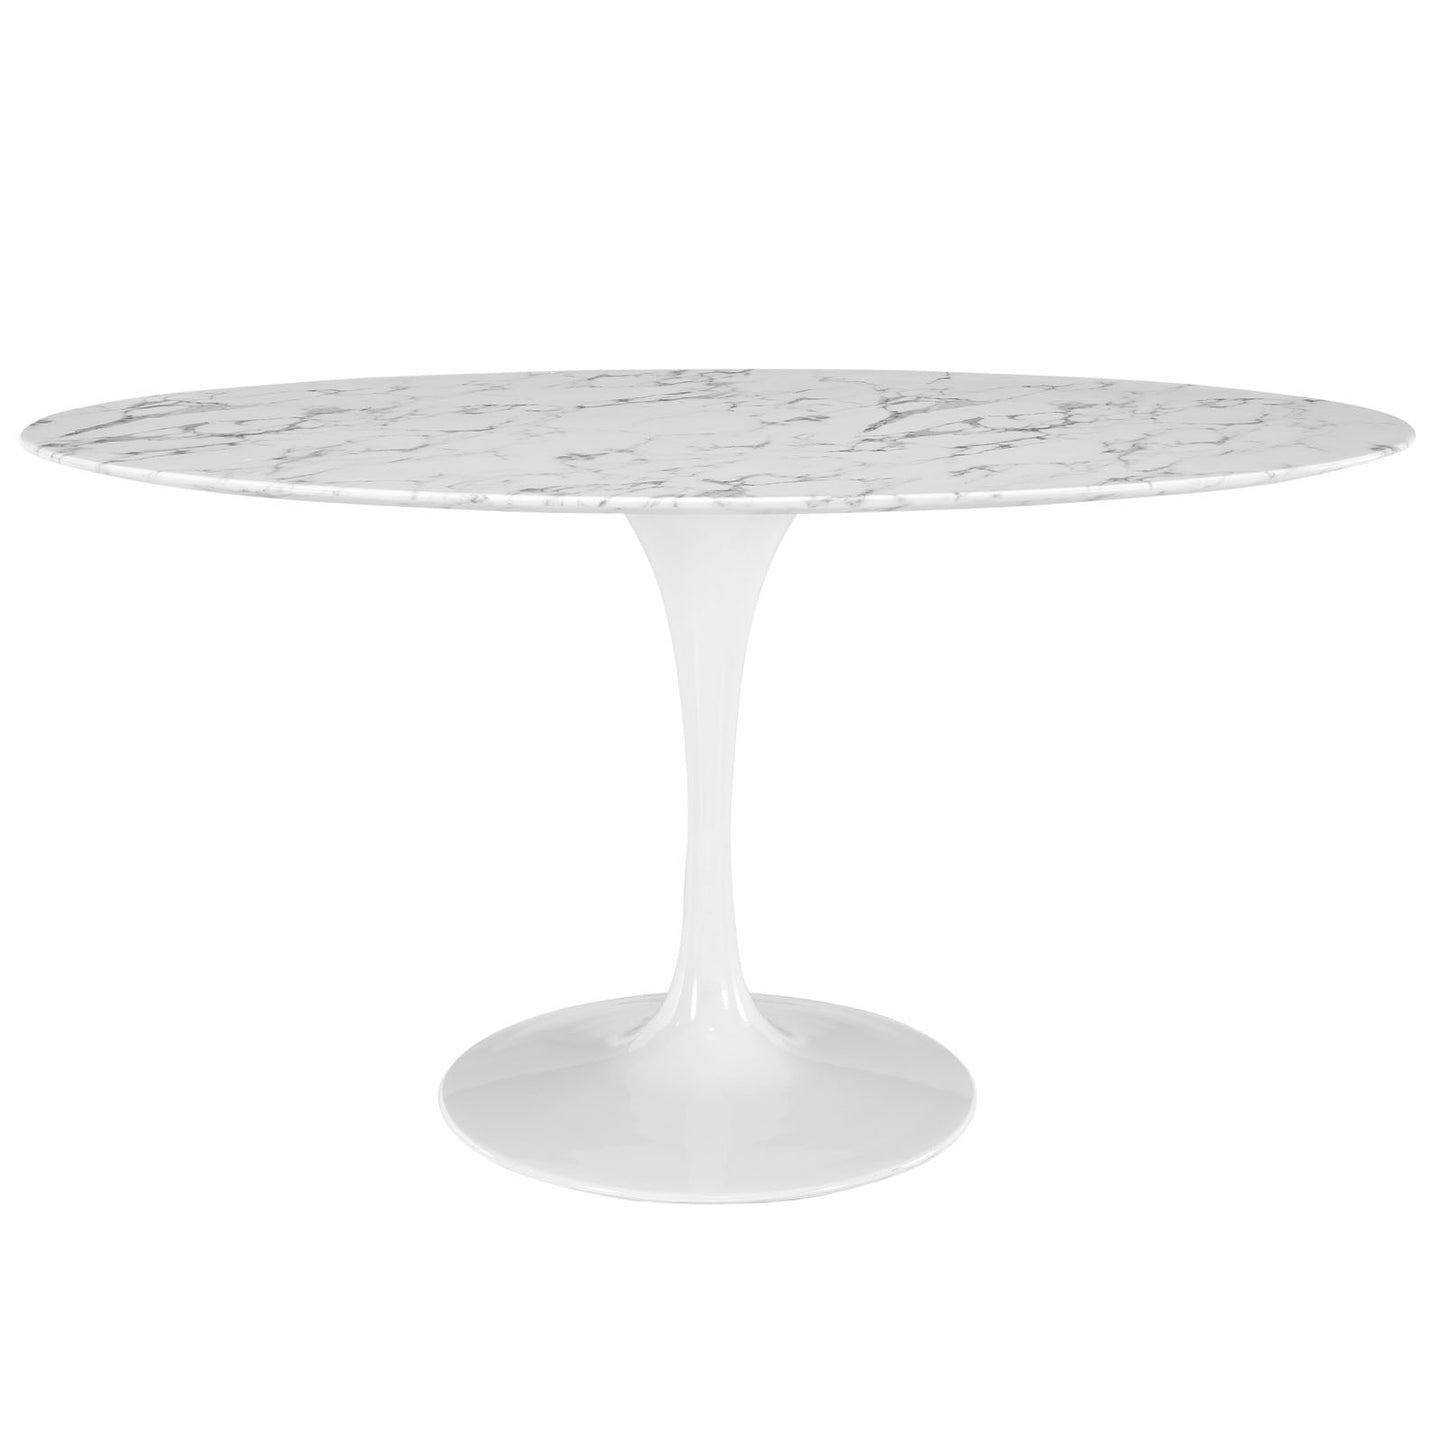 Tulip Style 60" Oval Marble Dining Table - living-essentials